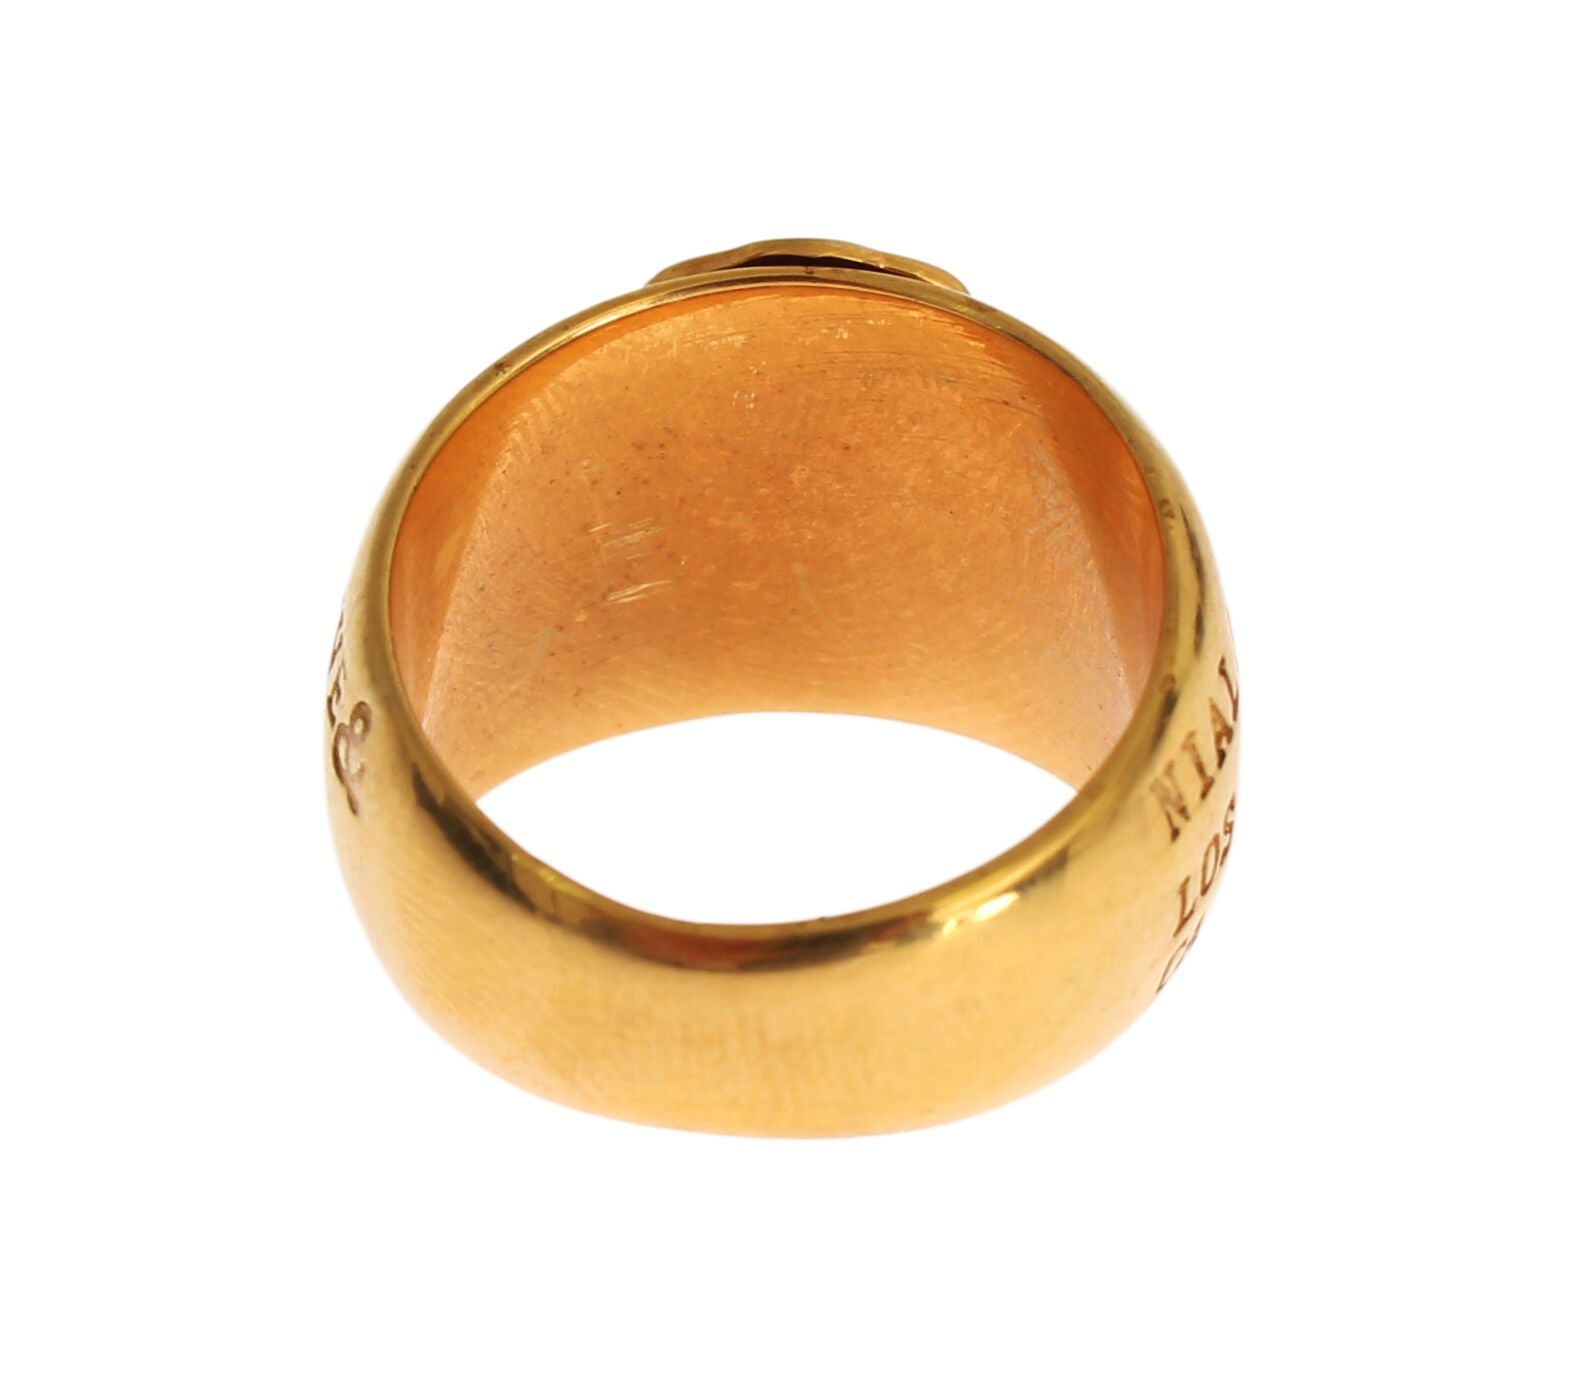 Glamorous Gold-Plated Sterling Silver Ring